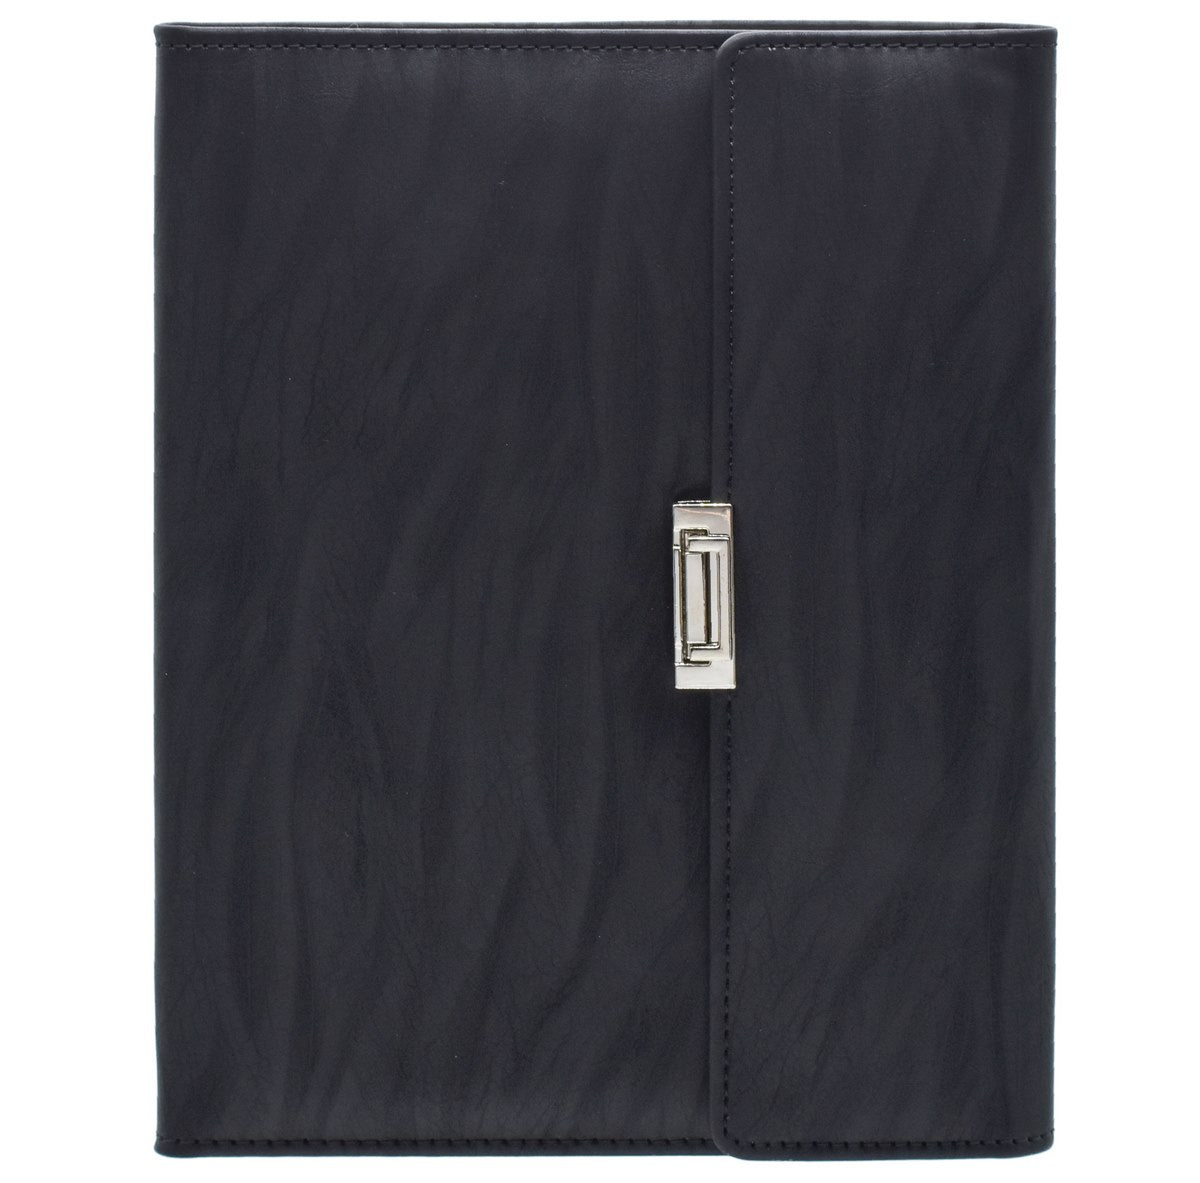 jags-mumbai Notebooks & Diaries Note book Diary Leather BK Cover W Loock A5